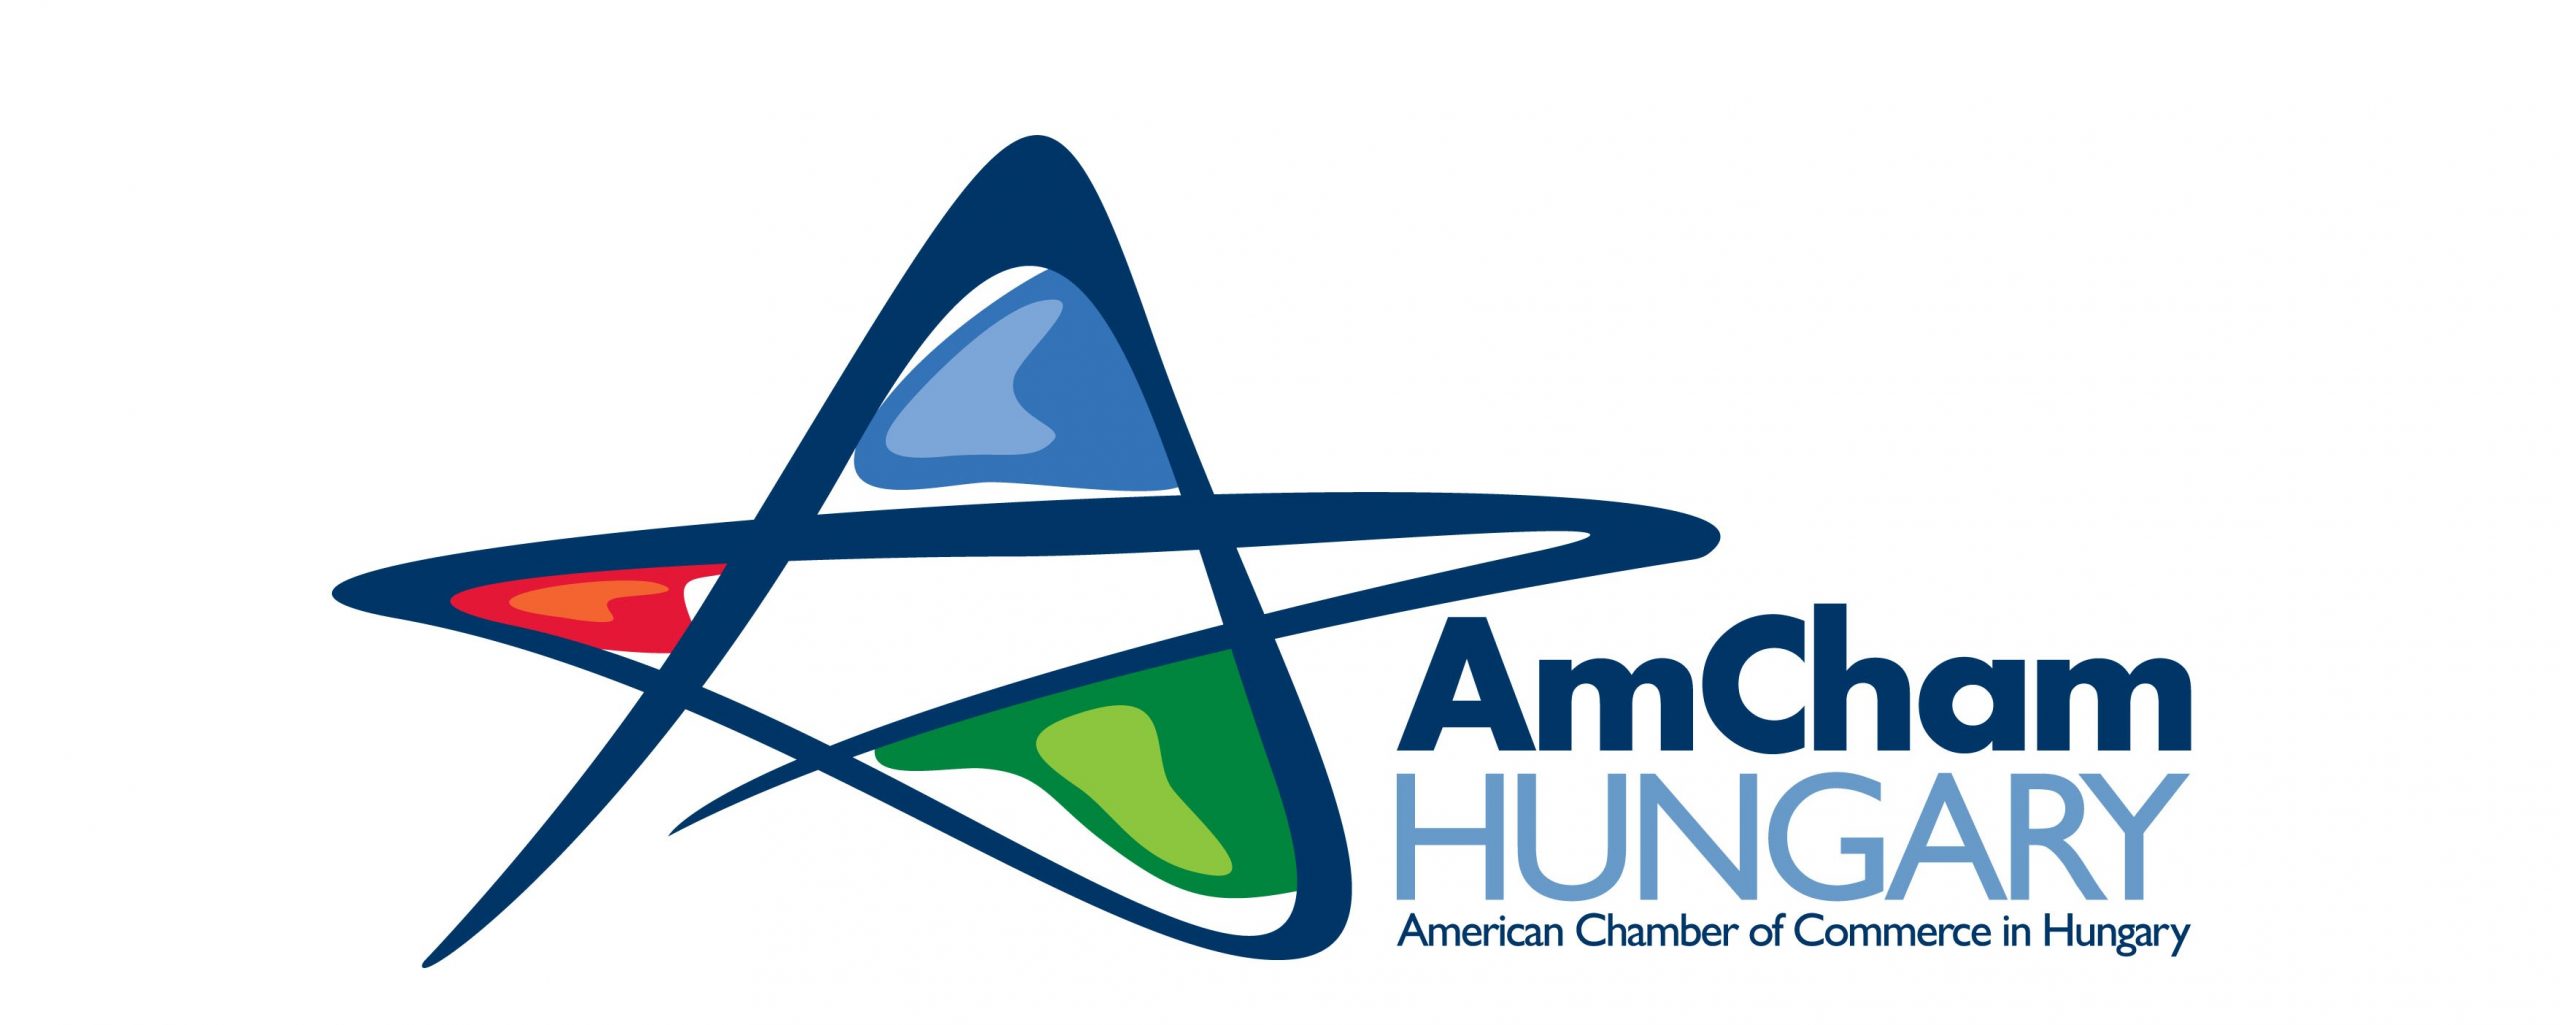 AMCHAM- American Chamber of Commerce in Hungary